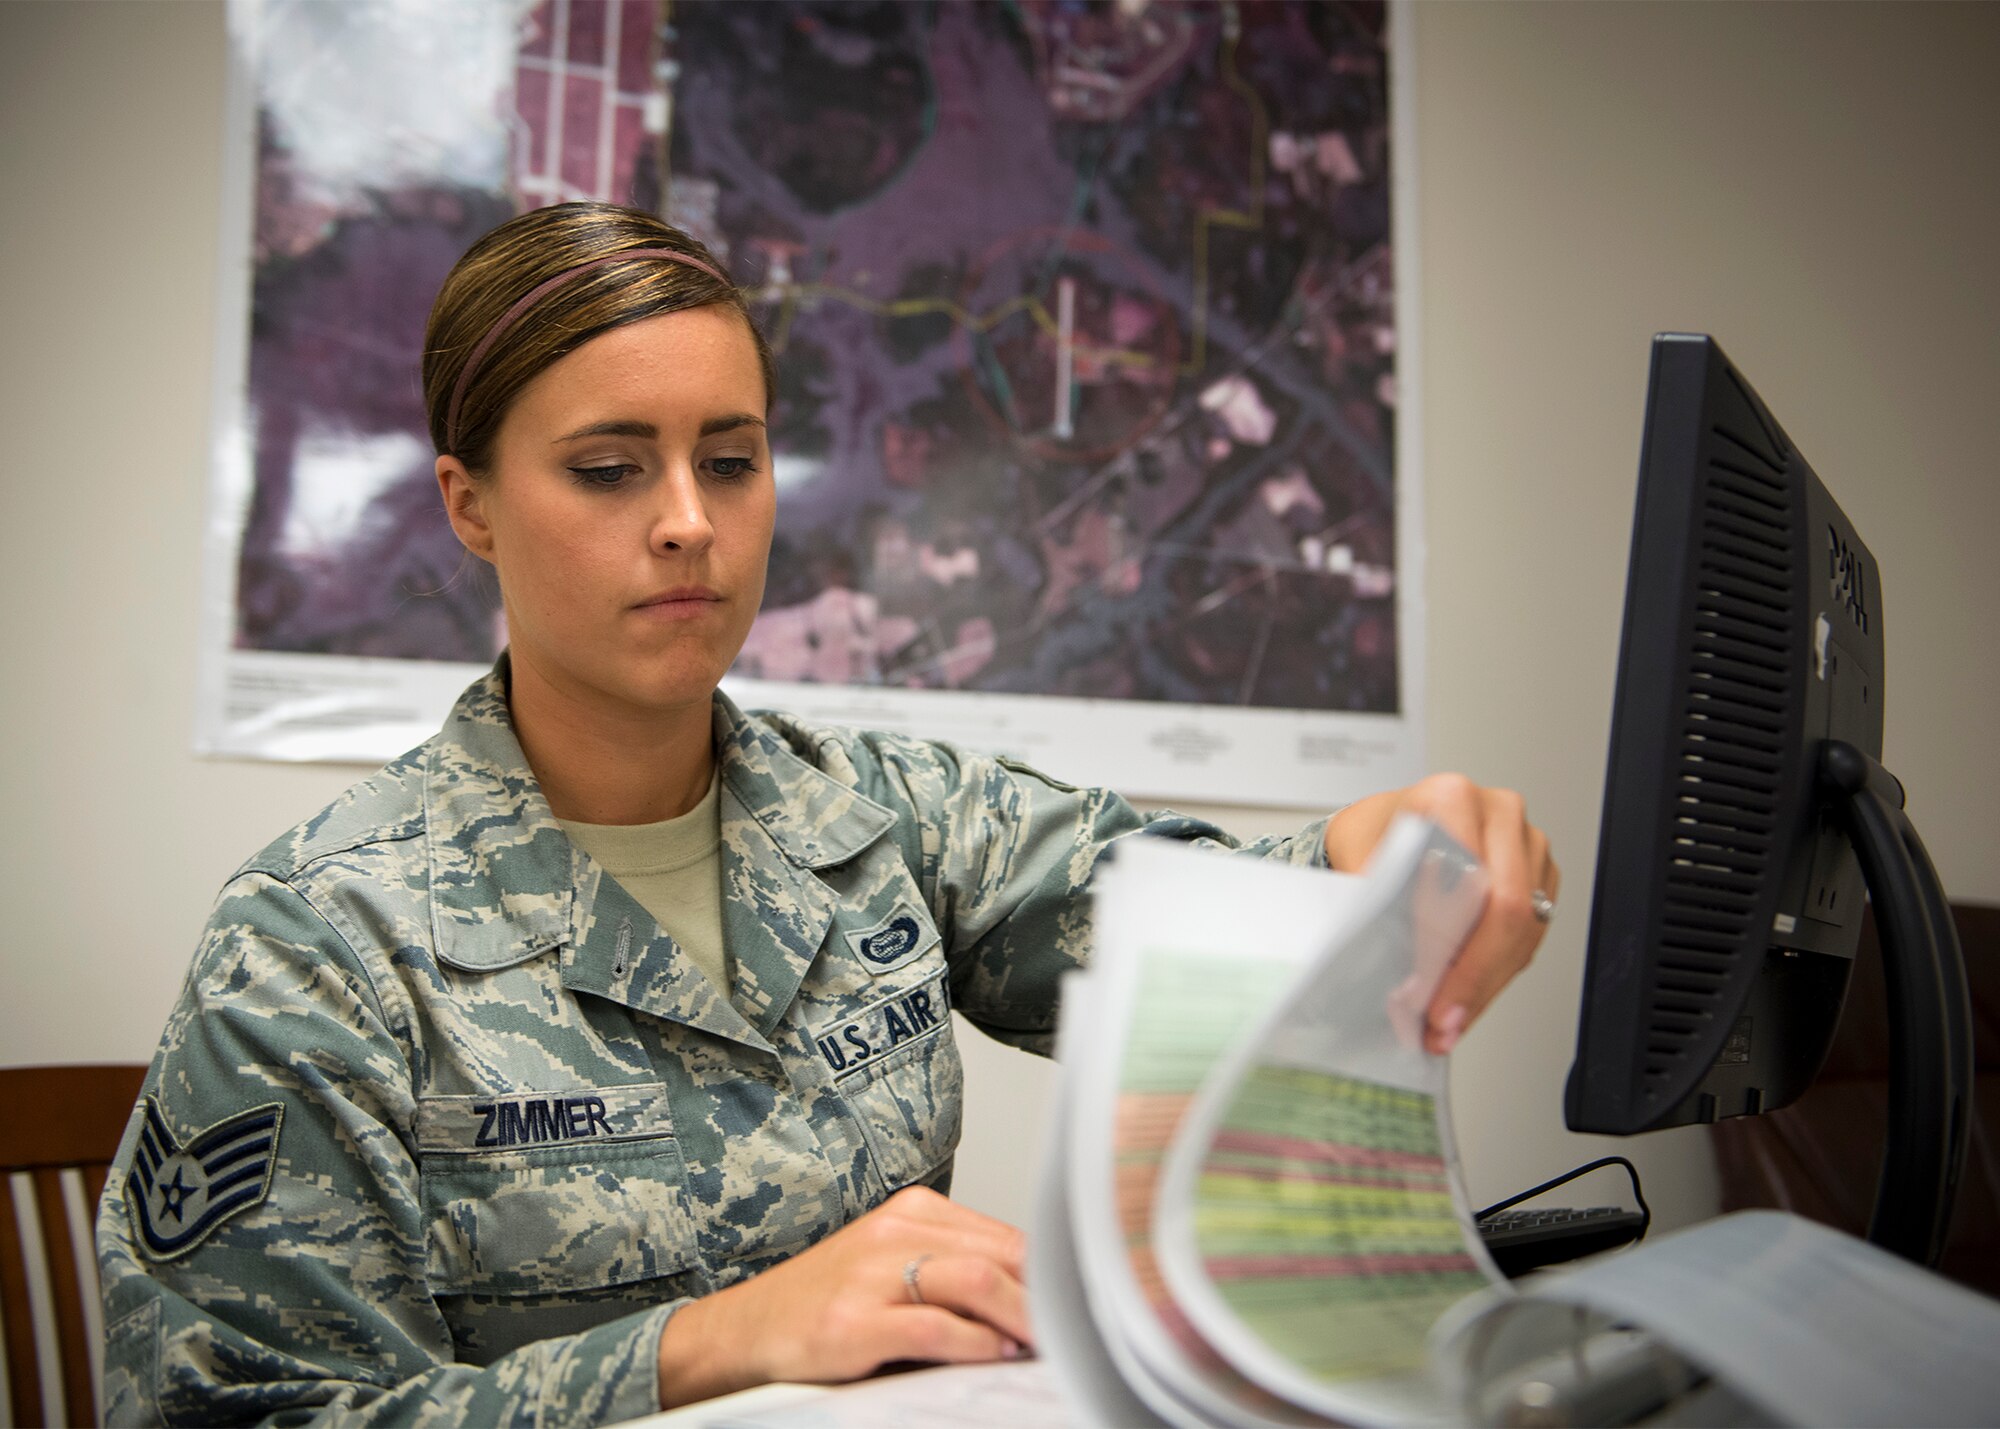 U.S. Air Force Staff Sgt. Jamie Zimmer, 347th Operations Support Squadron intelligence analyst, flips through a binder, June 29, 2016, at Moody Air Force Base, Ga. As an intelligence analyst, Zimmer is responsible for receiving, analyzing, reporting and disseminating information to ensure Airmen remain safe and can successfully complete their missions. (U.S. Air Force photo by Senior Airman Ryan Callaghan)